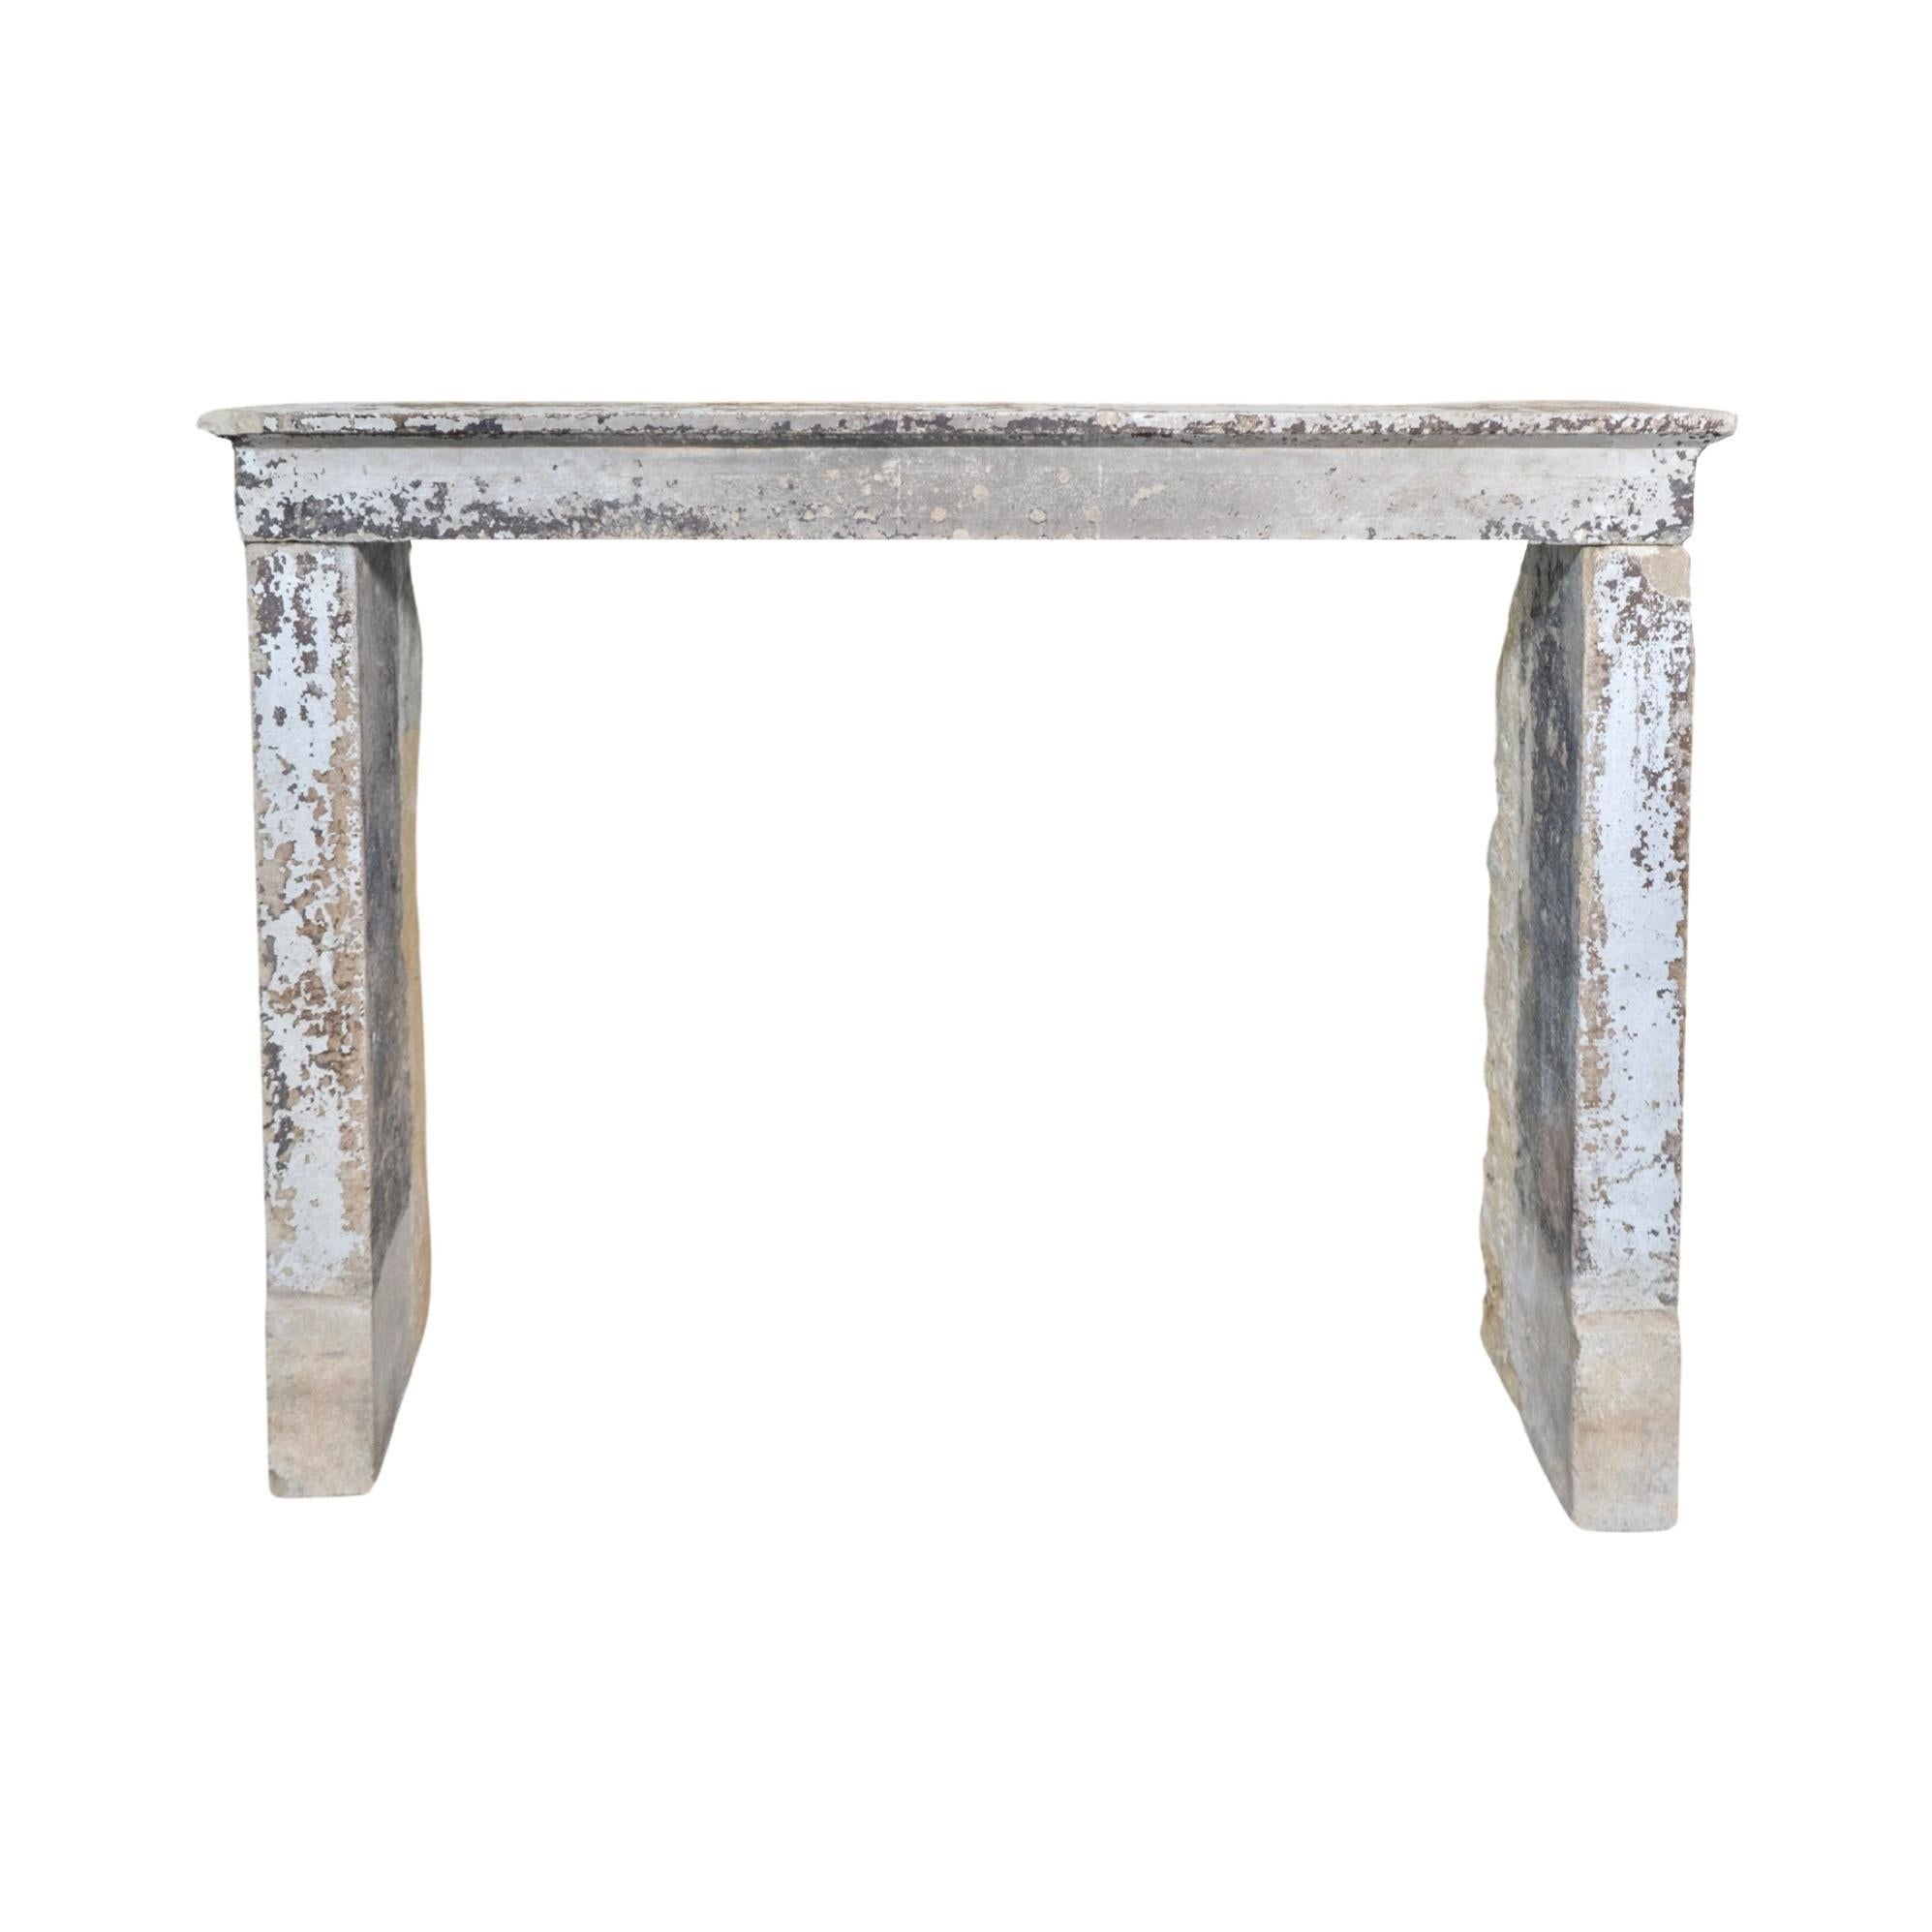 Crafted from French limestone and originating from the 1780's, this farmhouse mantel brings timeless elegance to any fireplace. Its sturdy construction and rustic charm make it a durable and attractive addition to your home. Elevate your decor with